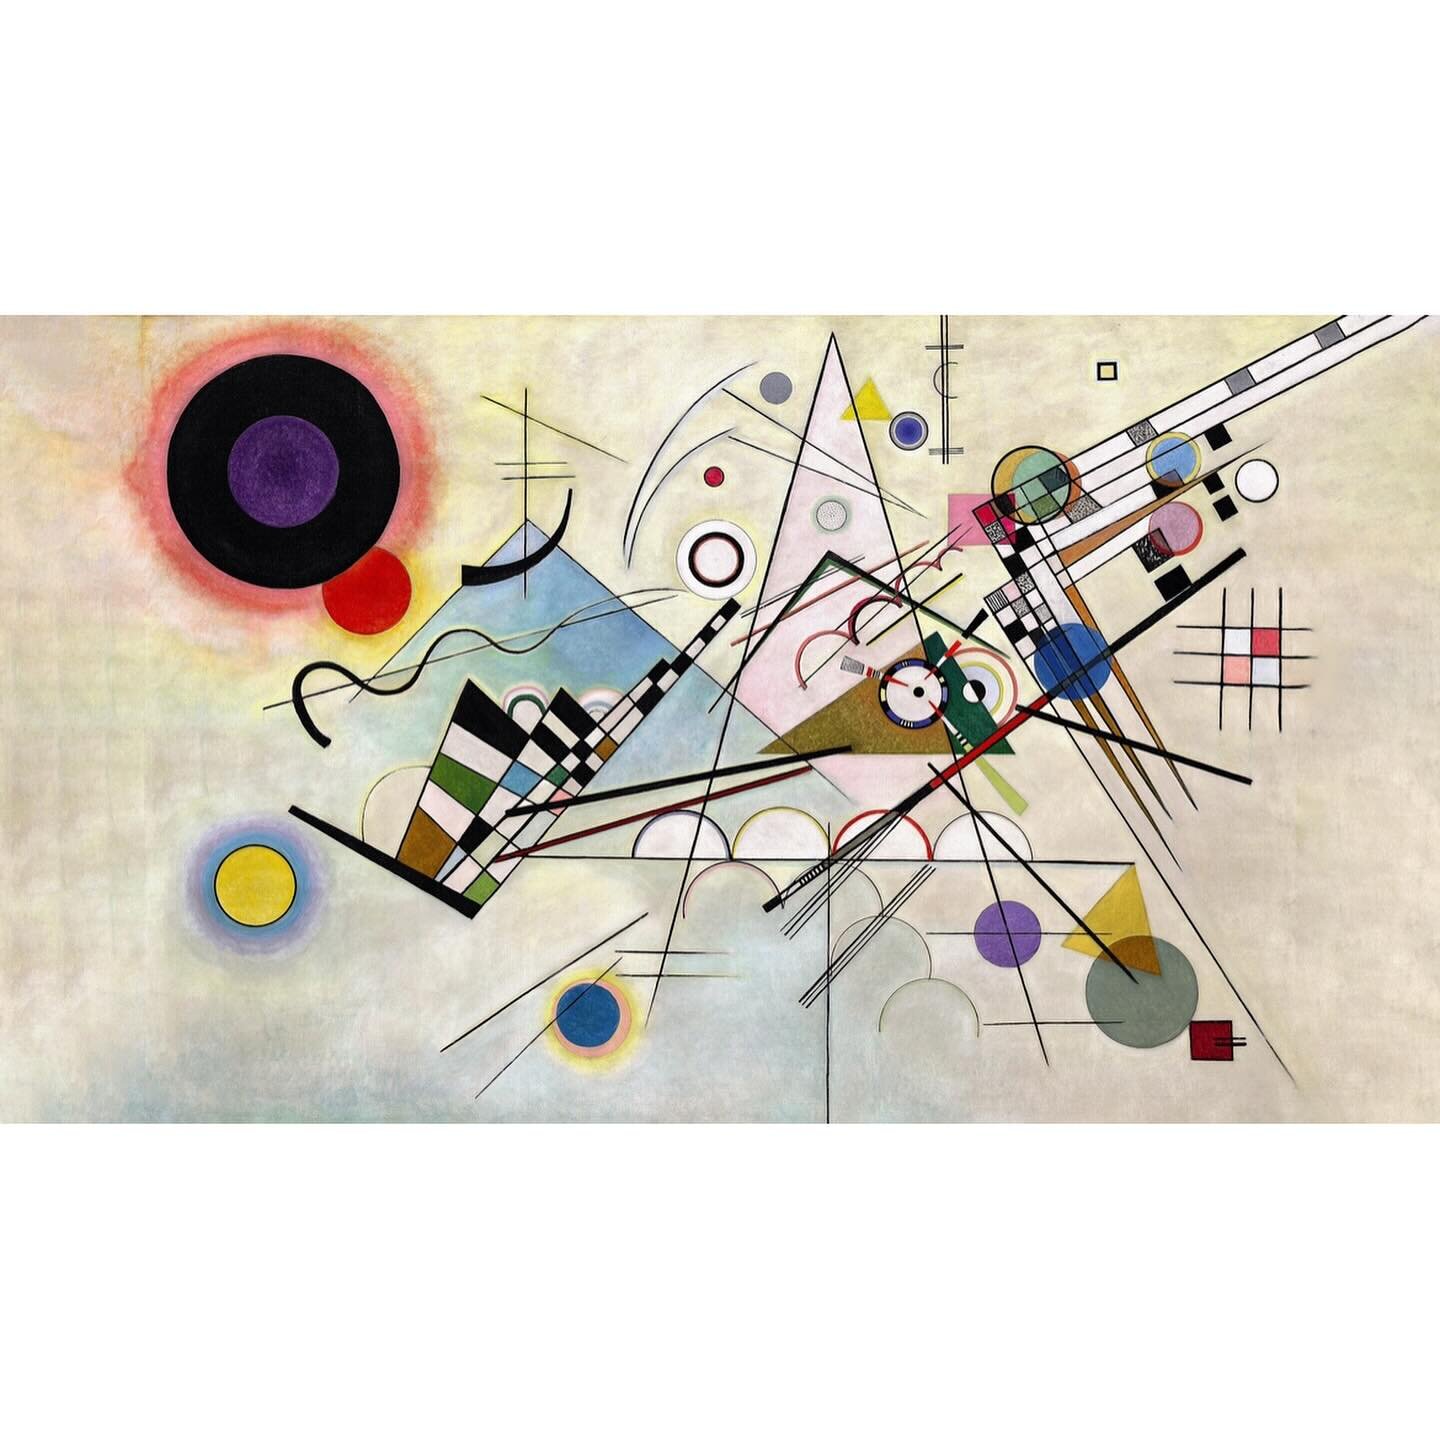 Good Vibrations&hellip;

Wassily Kandinsky: &ldquo;Composition 8&rdquo; (1923)

☀️Just over a month left to apply for our Supporter Call for Entry: &ldquo;Good Vibrations&rdquo;⁠
⁠
DEADLINE TO SUBMIT: Saturday, April 27th, 2024 by 11:59 PM - link in 